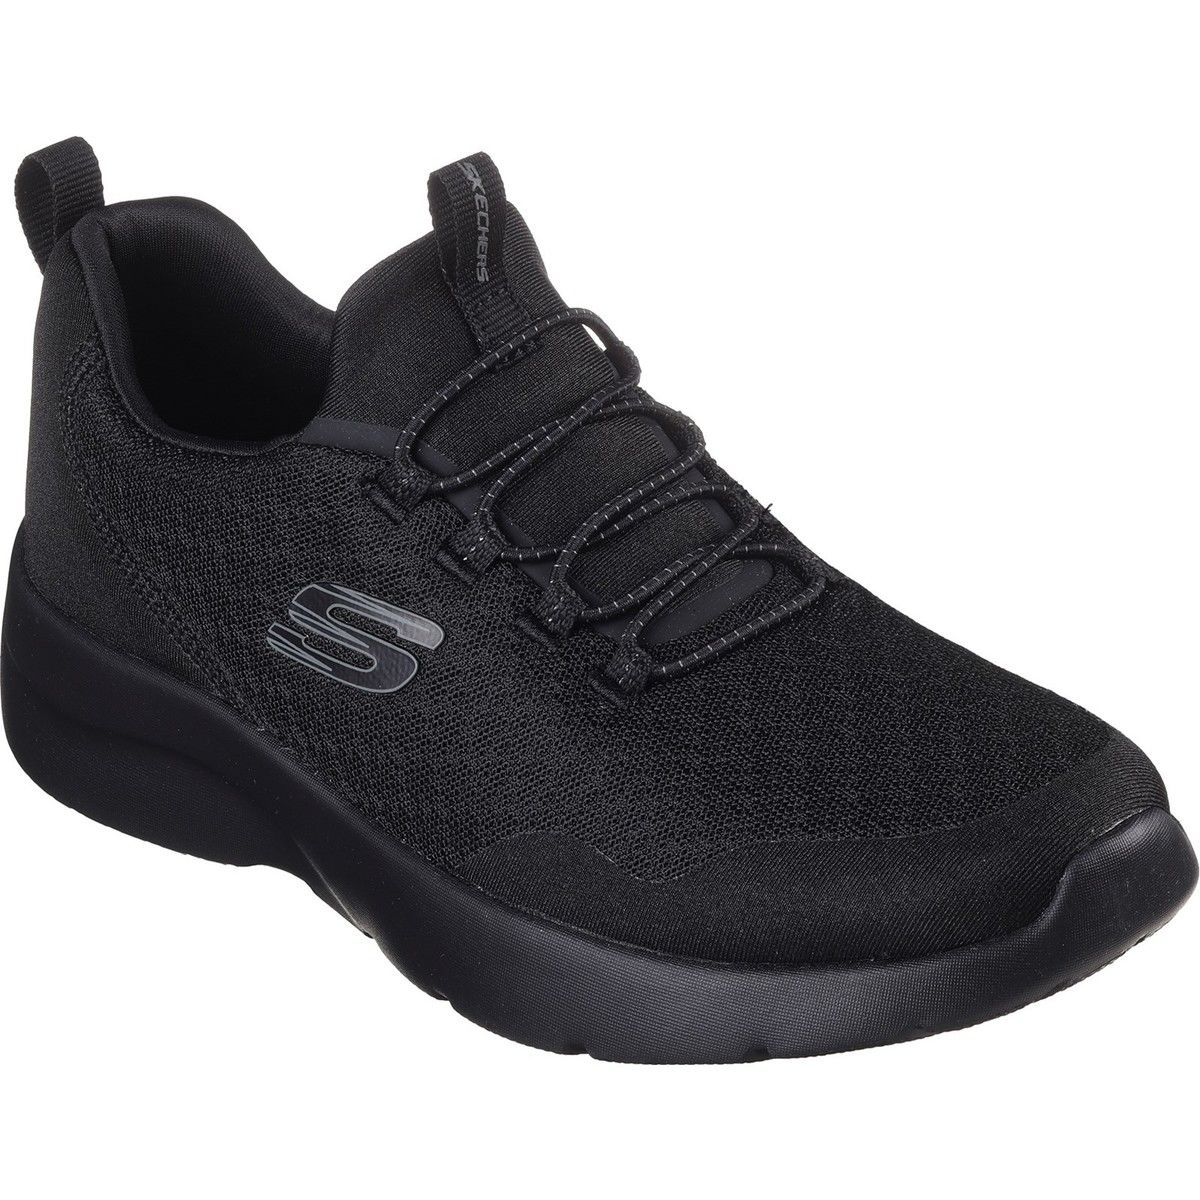 Skechers Dynamight 2.0 - Real Smooth BBK Black Womens trainers in a Plain Textile in Size 8